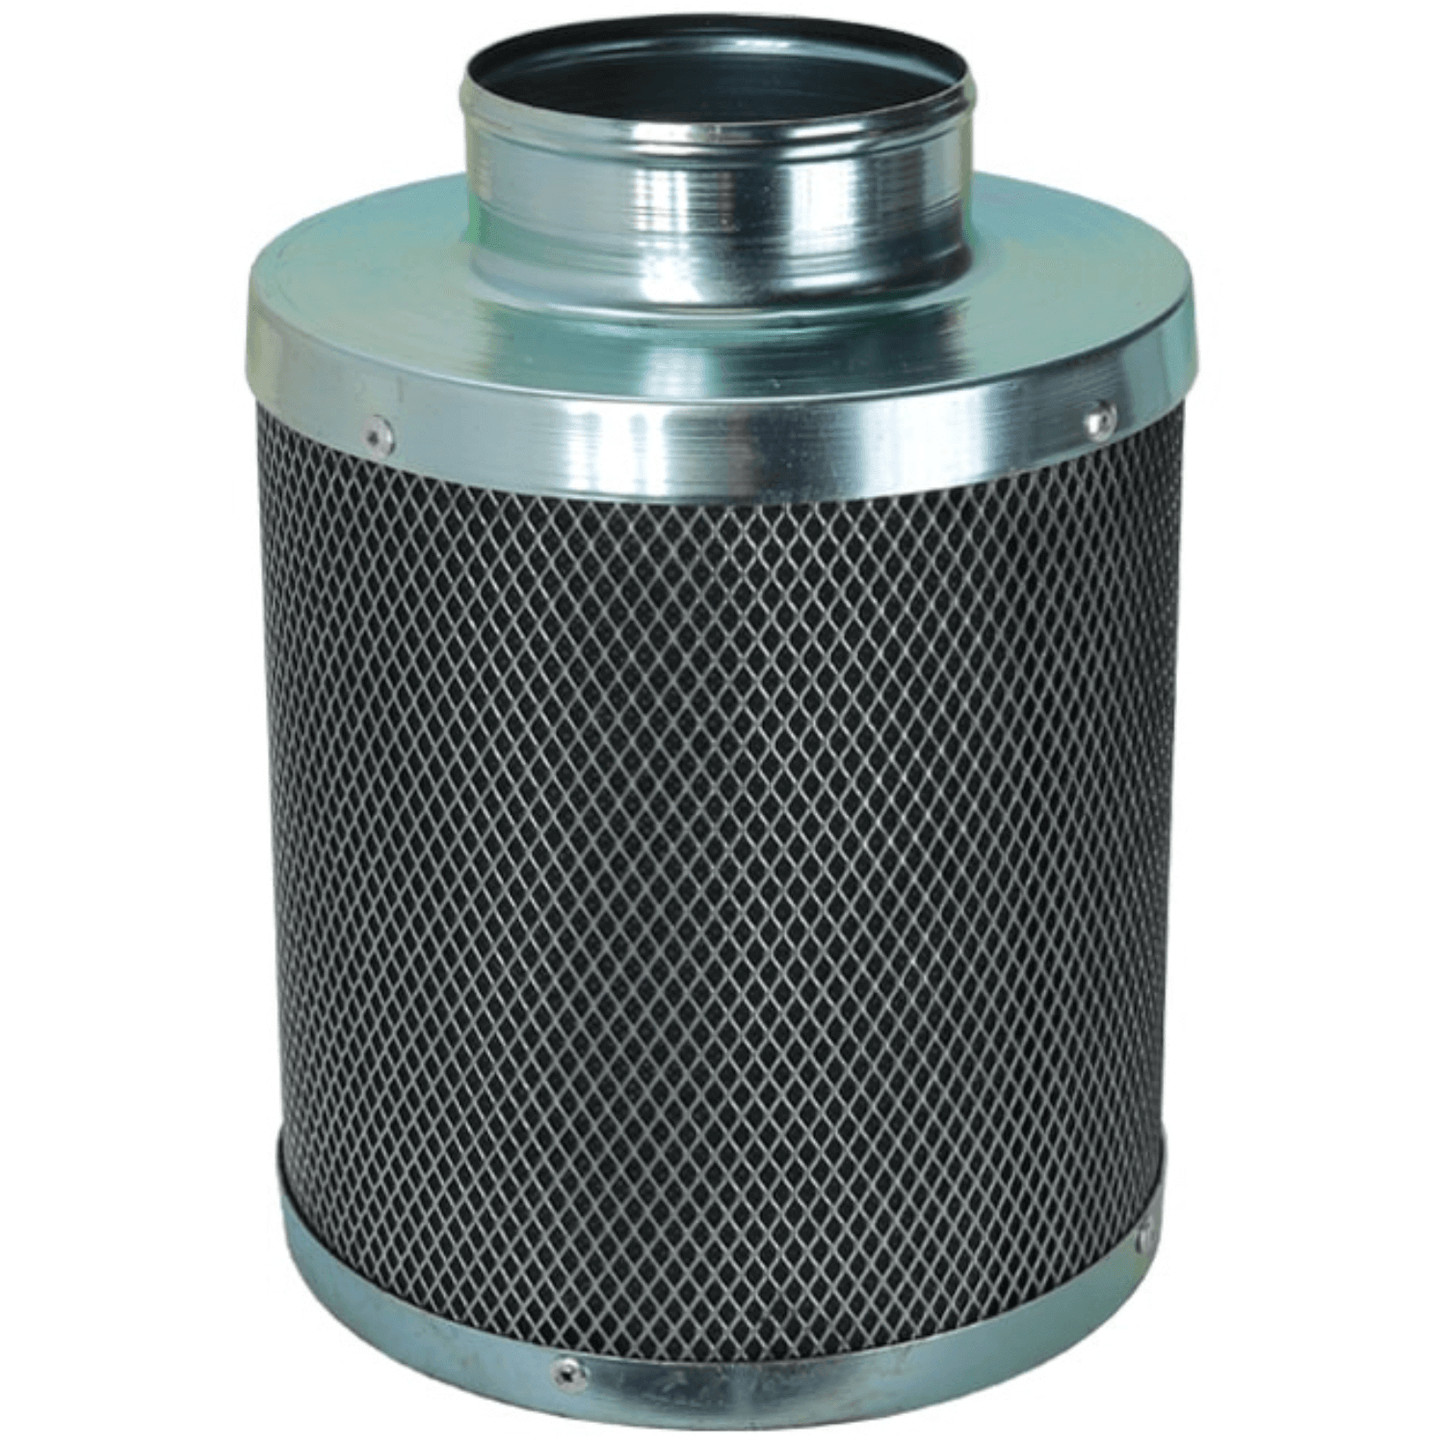 Charco Filters Plus 8" x 40" Activated Carbon Air Filter 971208-2 Climate Control 850019288865